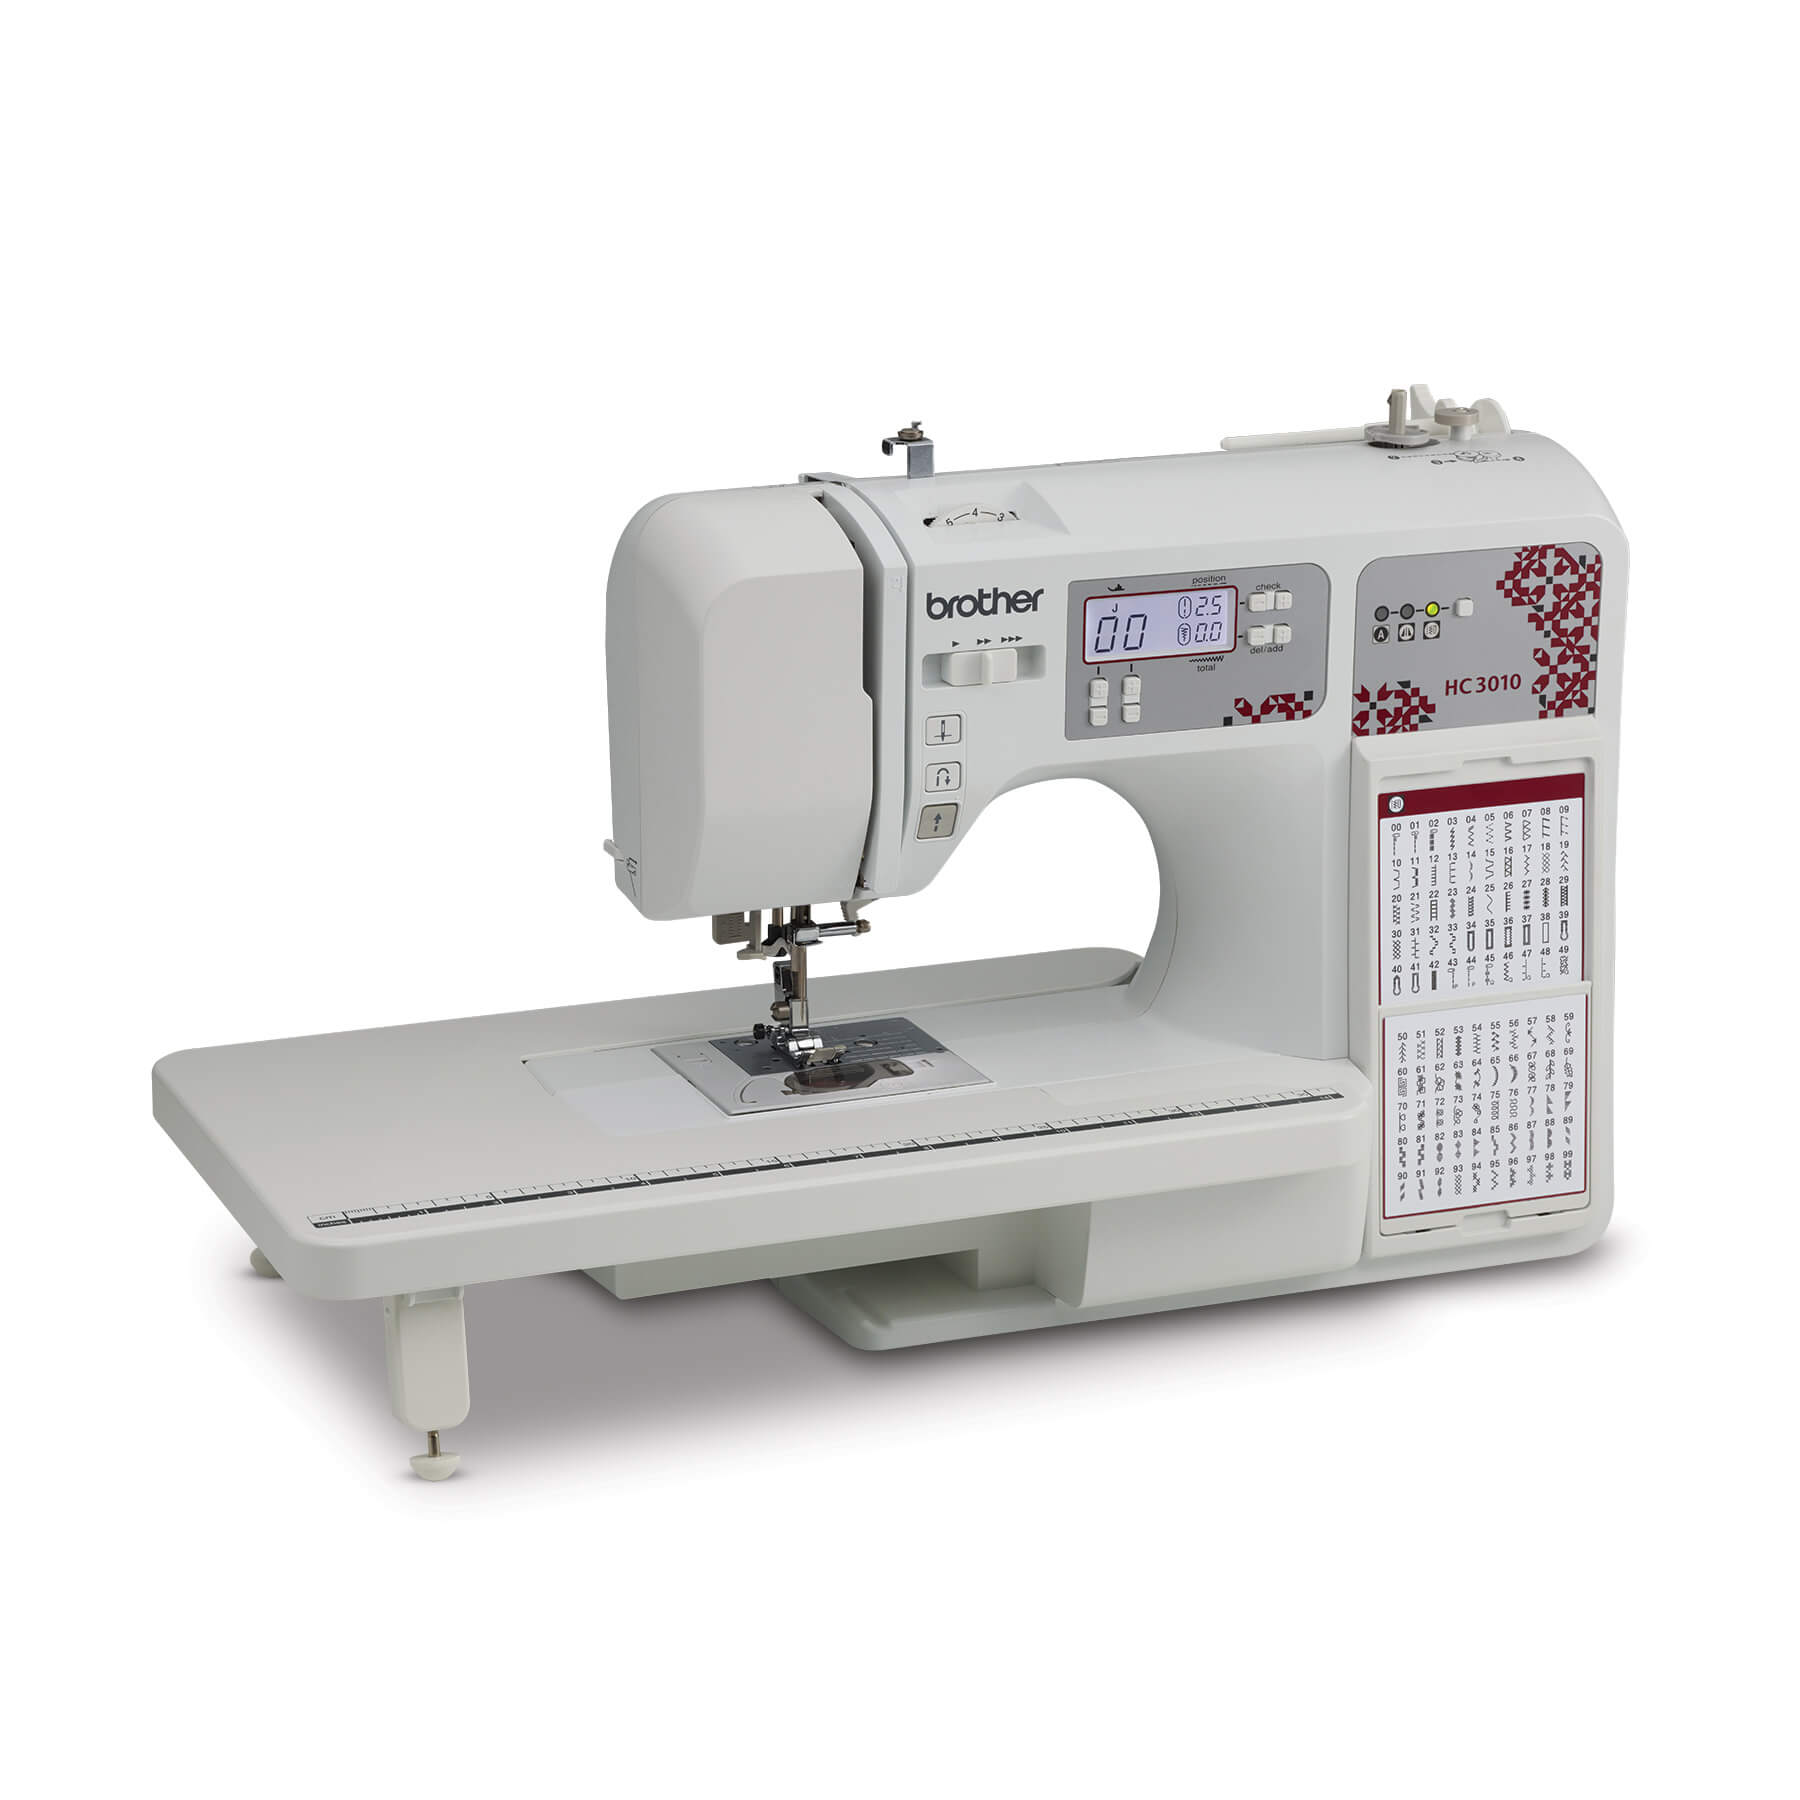 Image of Brother RHC3010 Refurbished Computerized Sewing & Quilting Machine